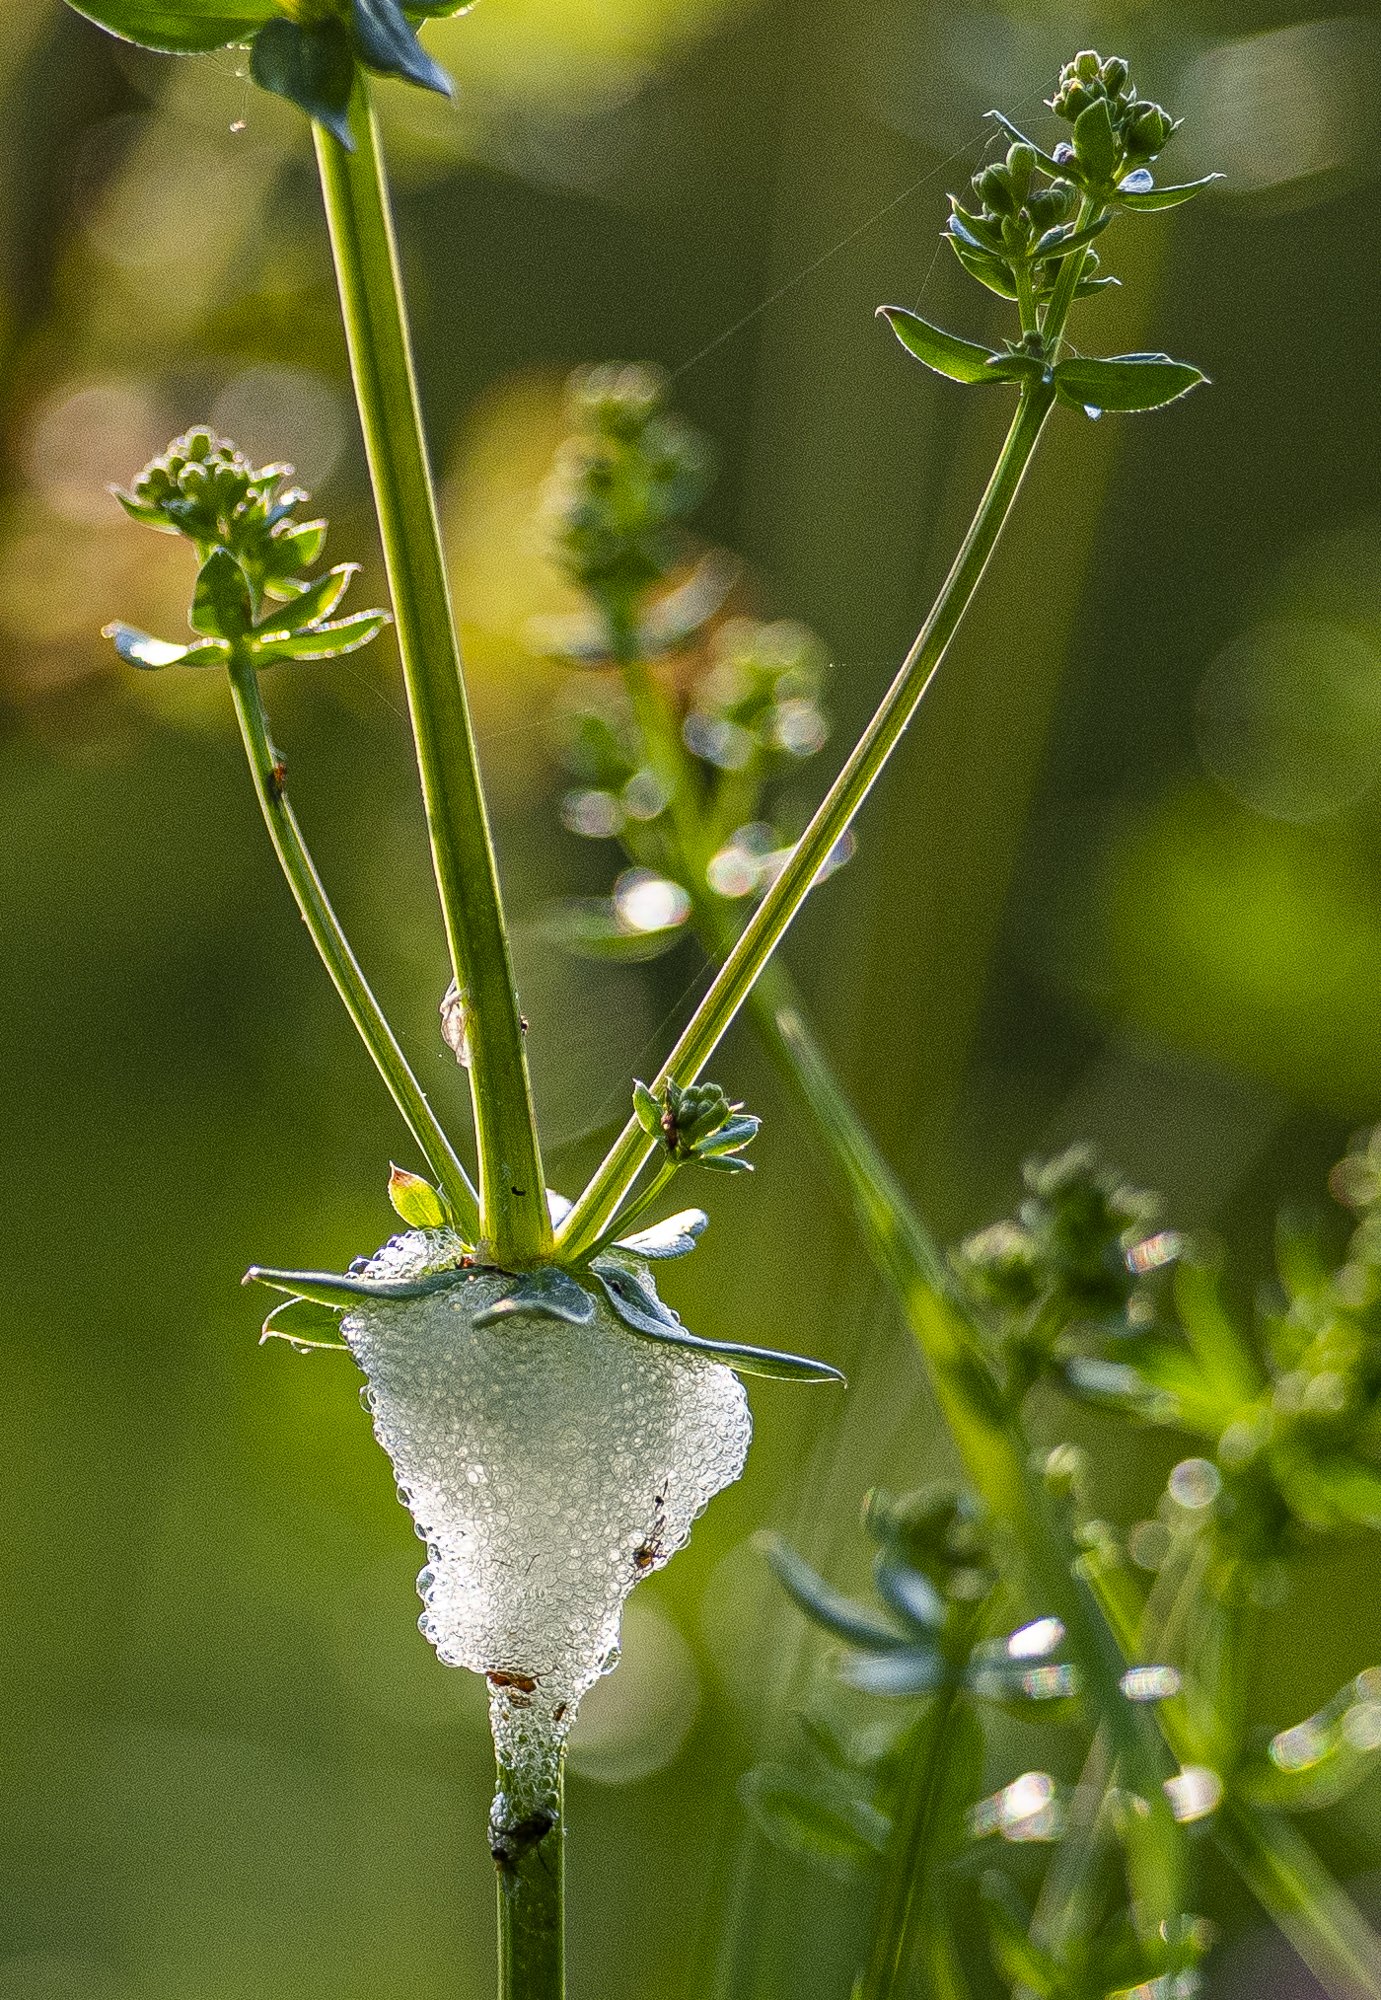  White blobs of bubbles on plants are created by the insects called spittlebugs, and their foam helps protect them. 